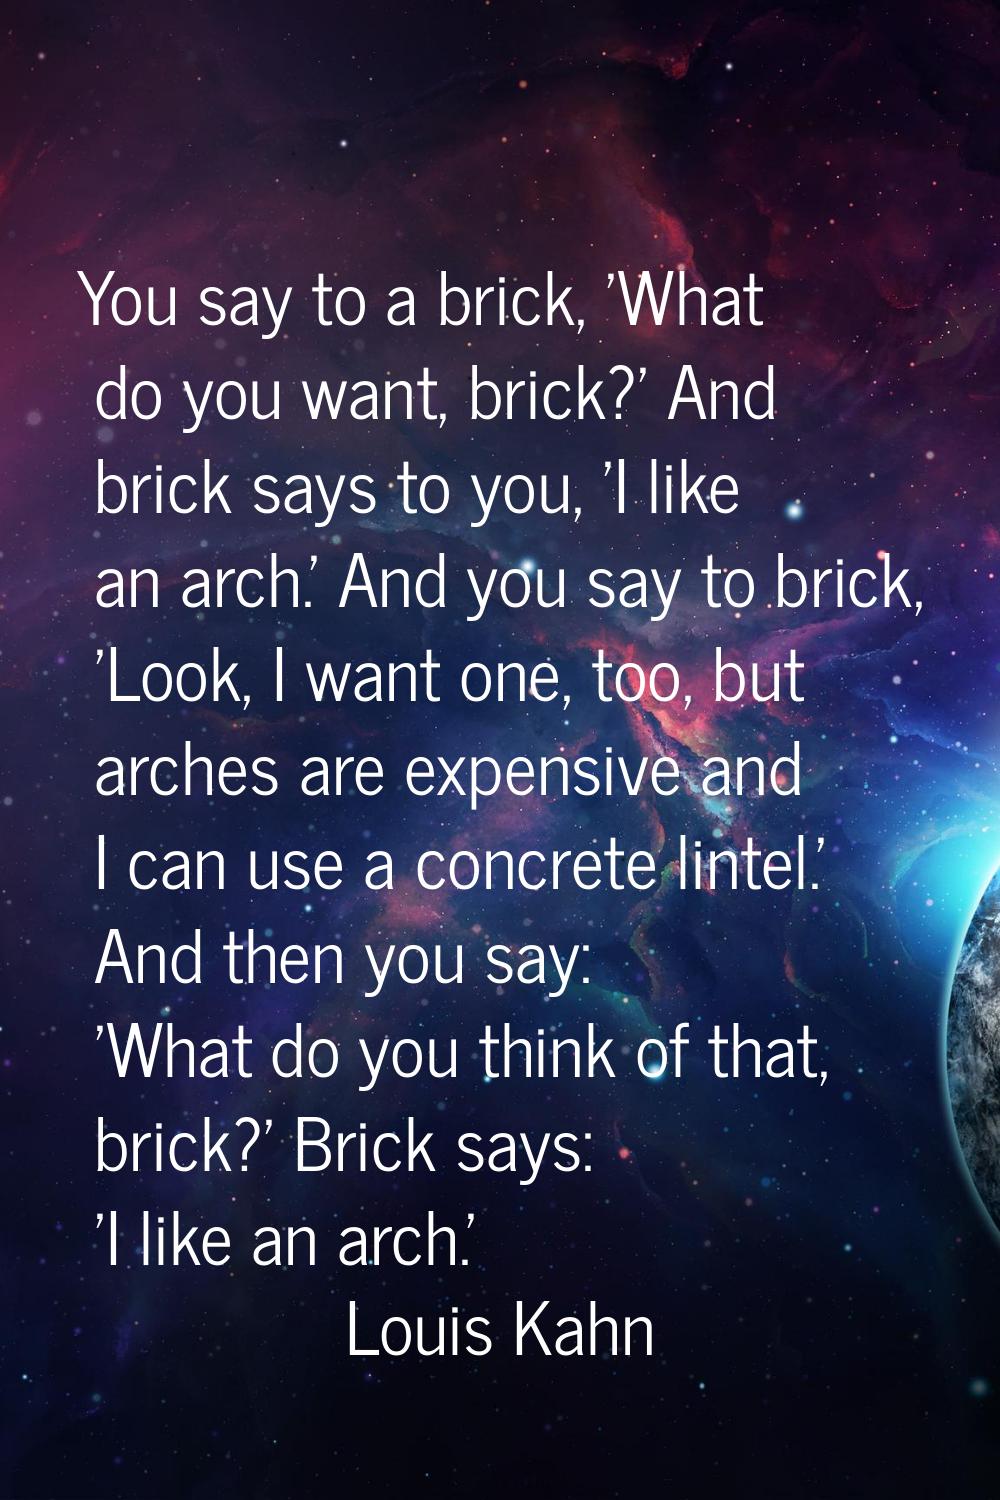 You say to a brick, 'What do you want, brick?' And brick says to you, 'I like an arch.' And you say